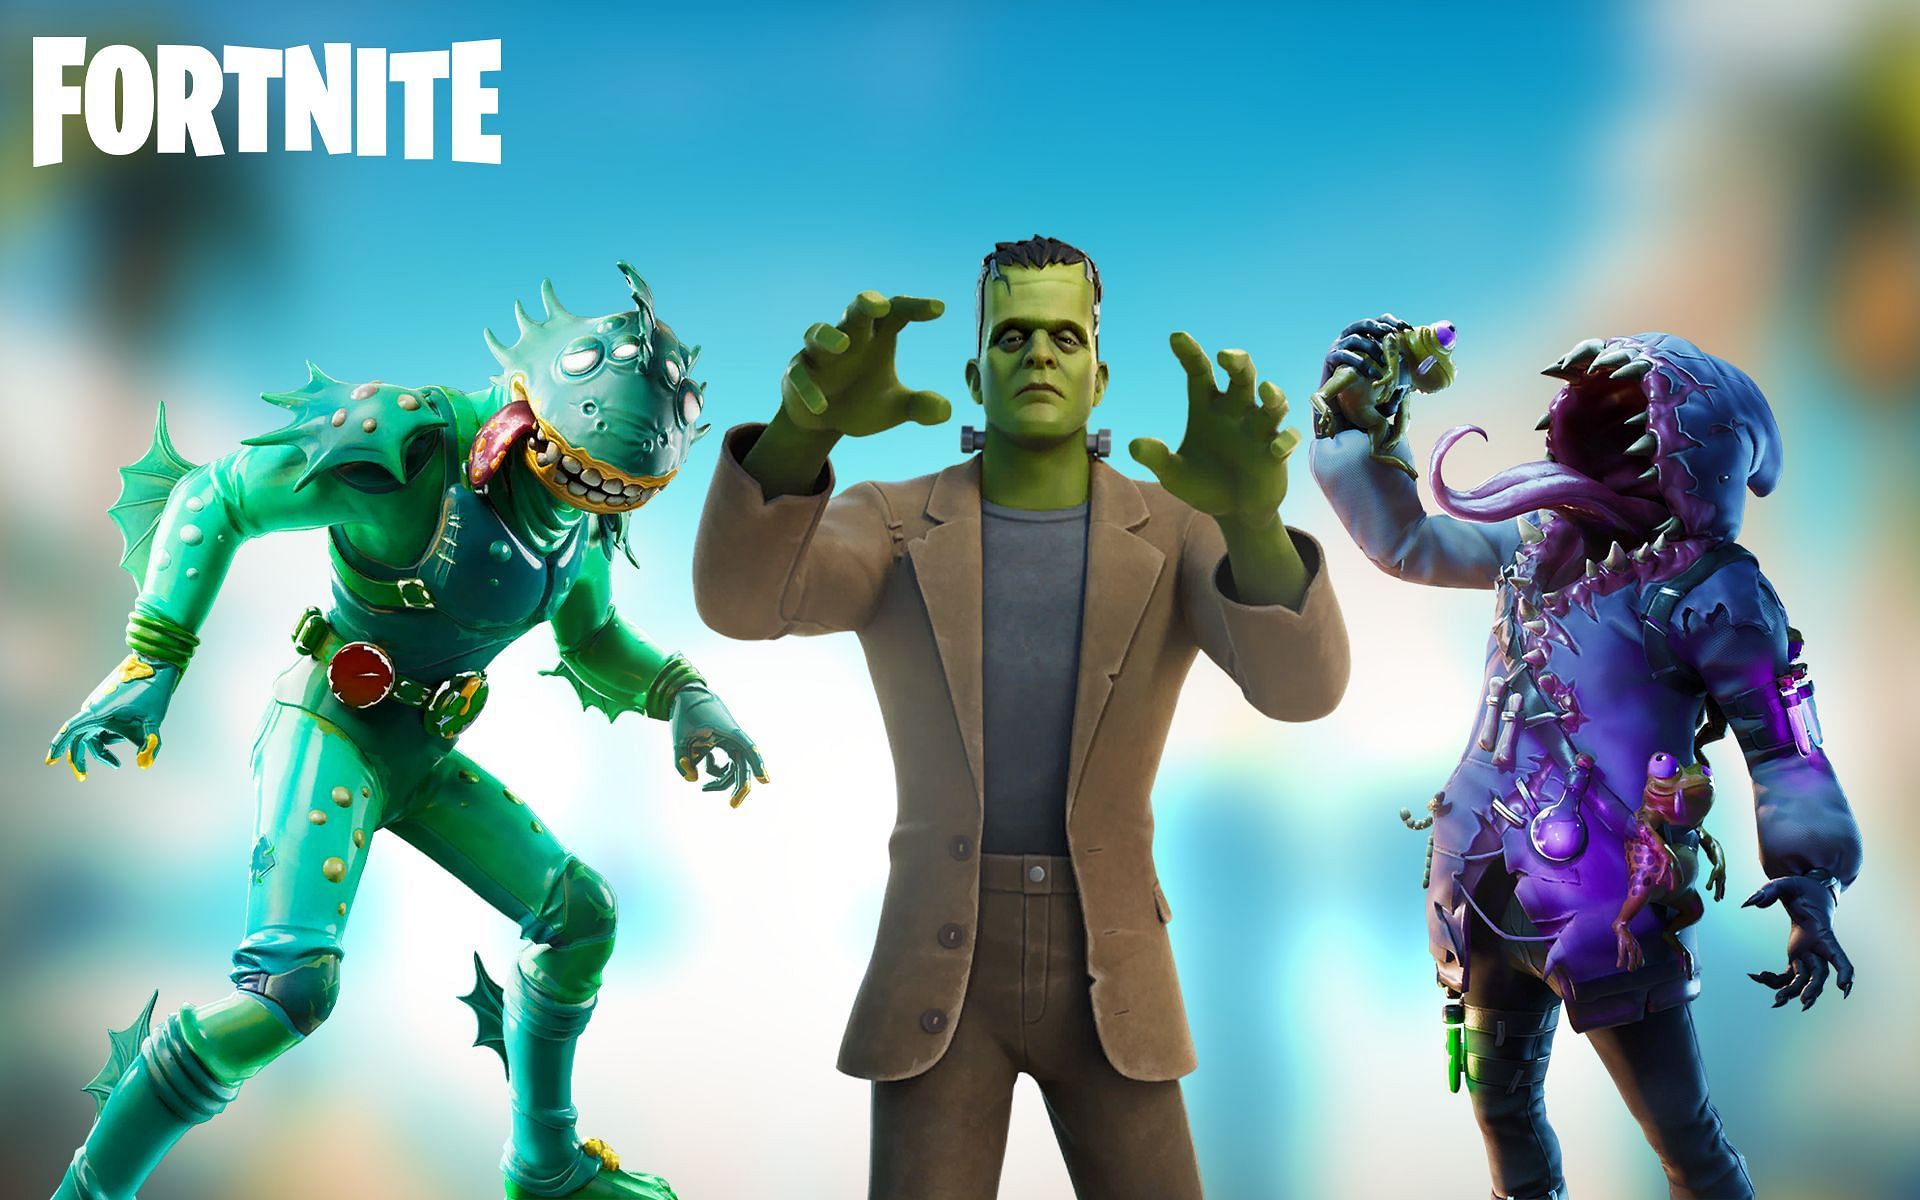 Monster skins are some of the most unique cosmetics in-game (Image via Sportskeeda)